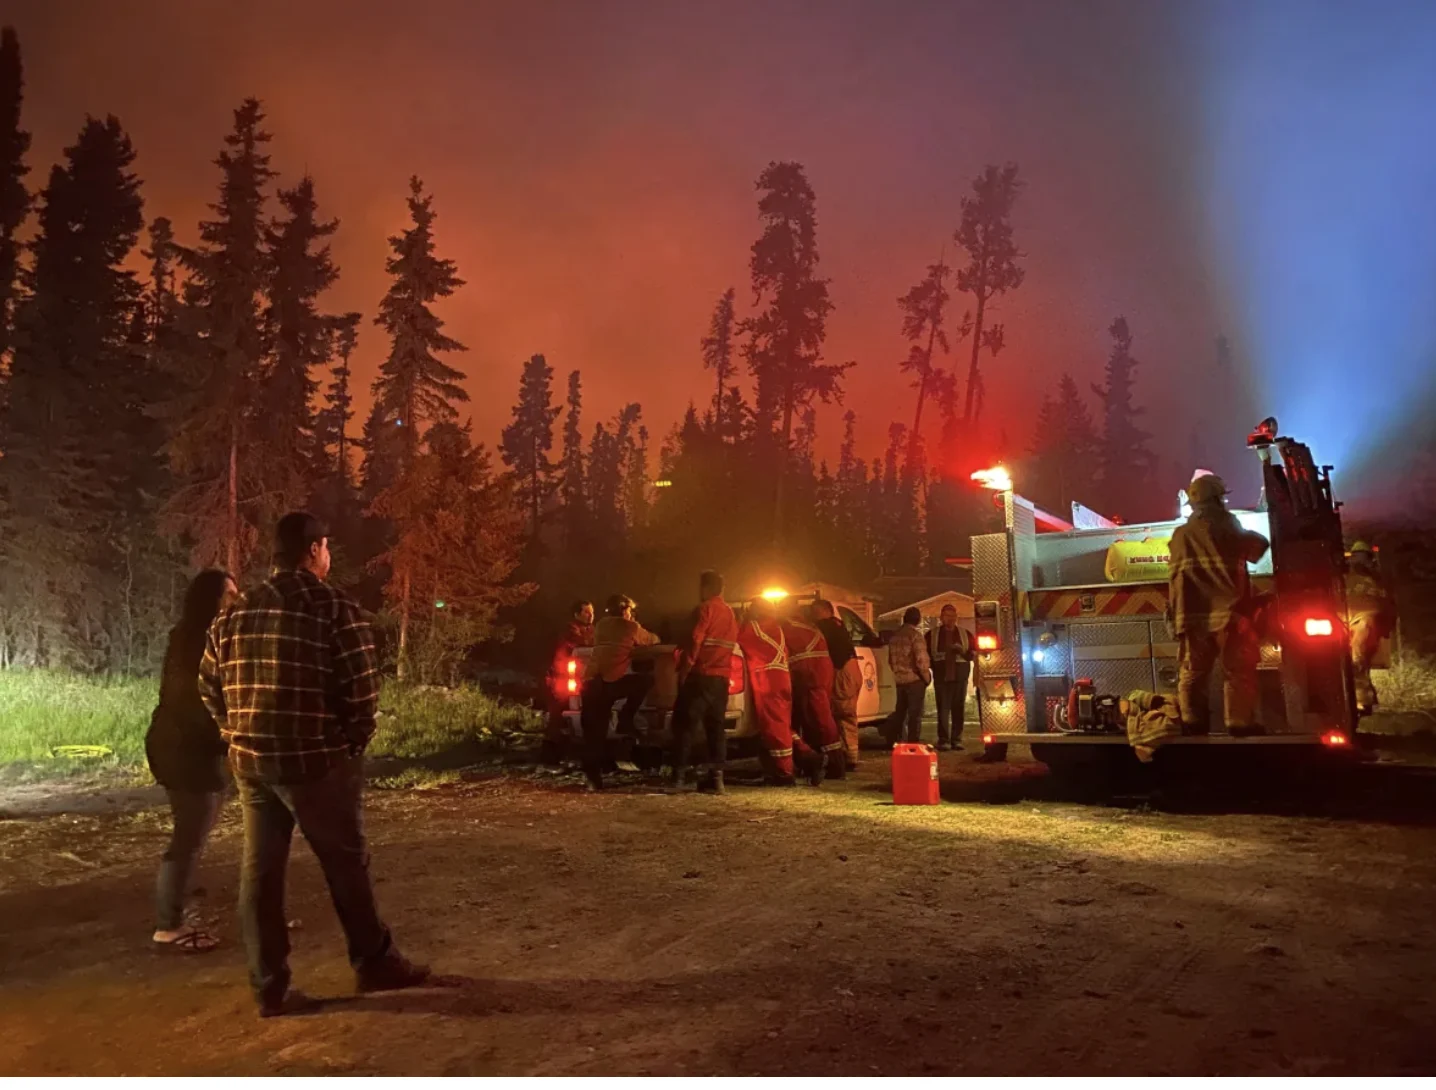 CBC: Lac La Ronge Indian Band Chief Tammy Cook-Searson says they are working closely with the Saskatchewan Public Safety Agency as well as local firefighters. (Chief Tammy Cook-Searson)